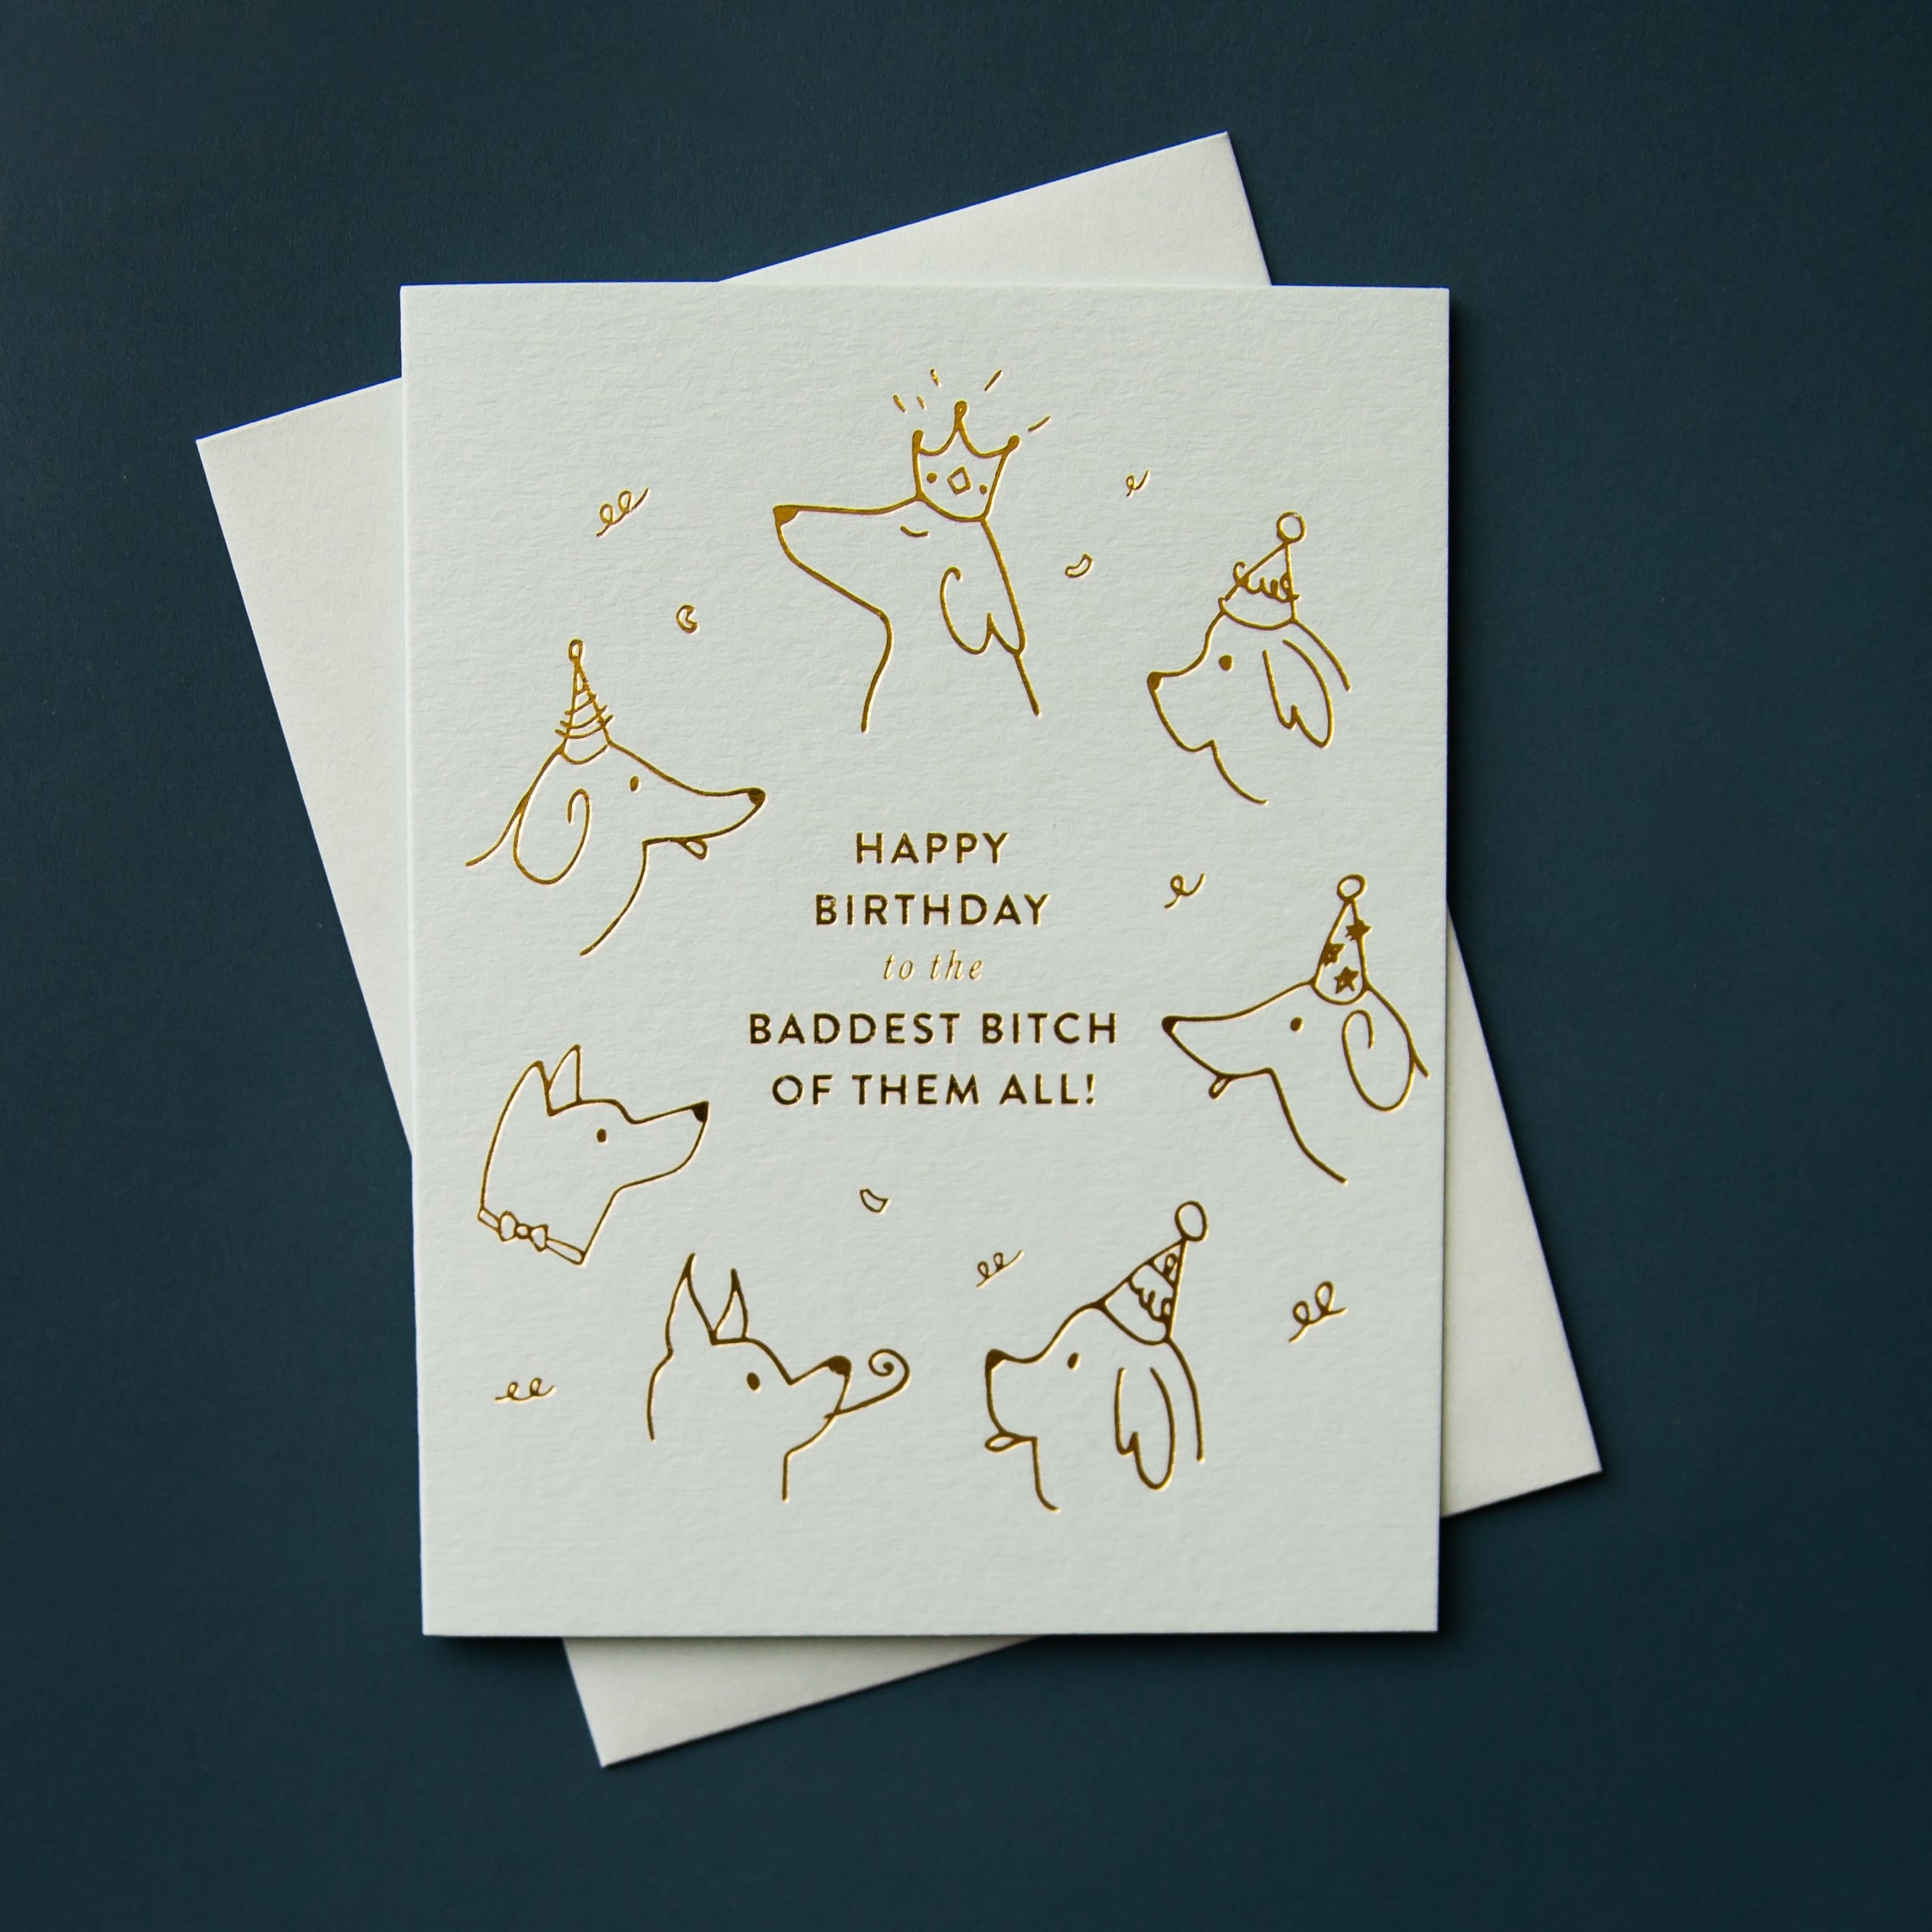 Light blue illustrated greeting card with matching envelope. The illustration is of sketchy dog heads wearing party hats, in gold foil, with text &quot;Happy Birthday to the Baddest Bitch of Them All!&quot;